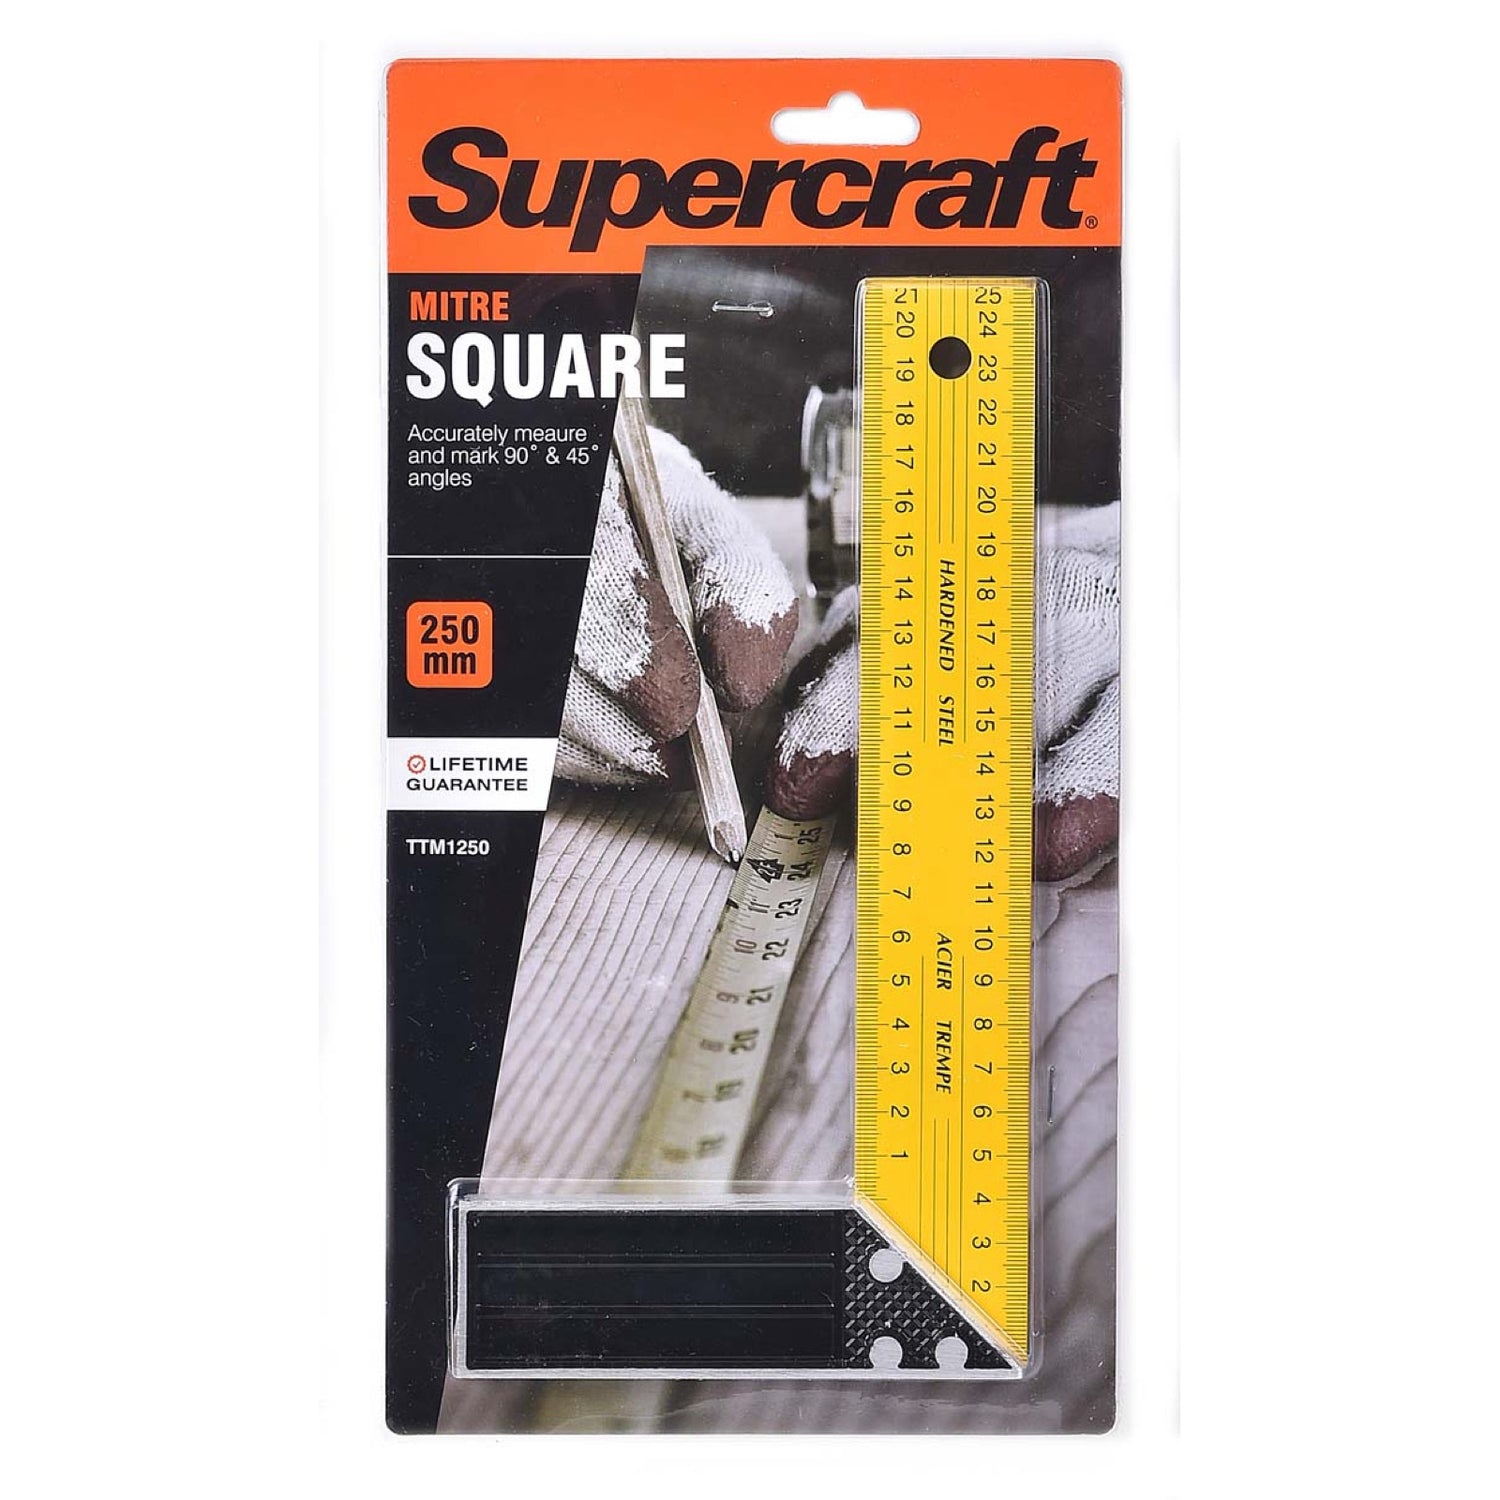 Supercraft Square Try / Mitre 250mm